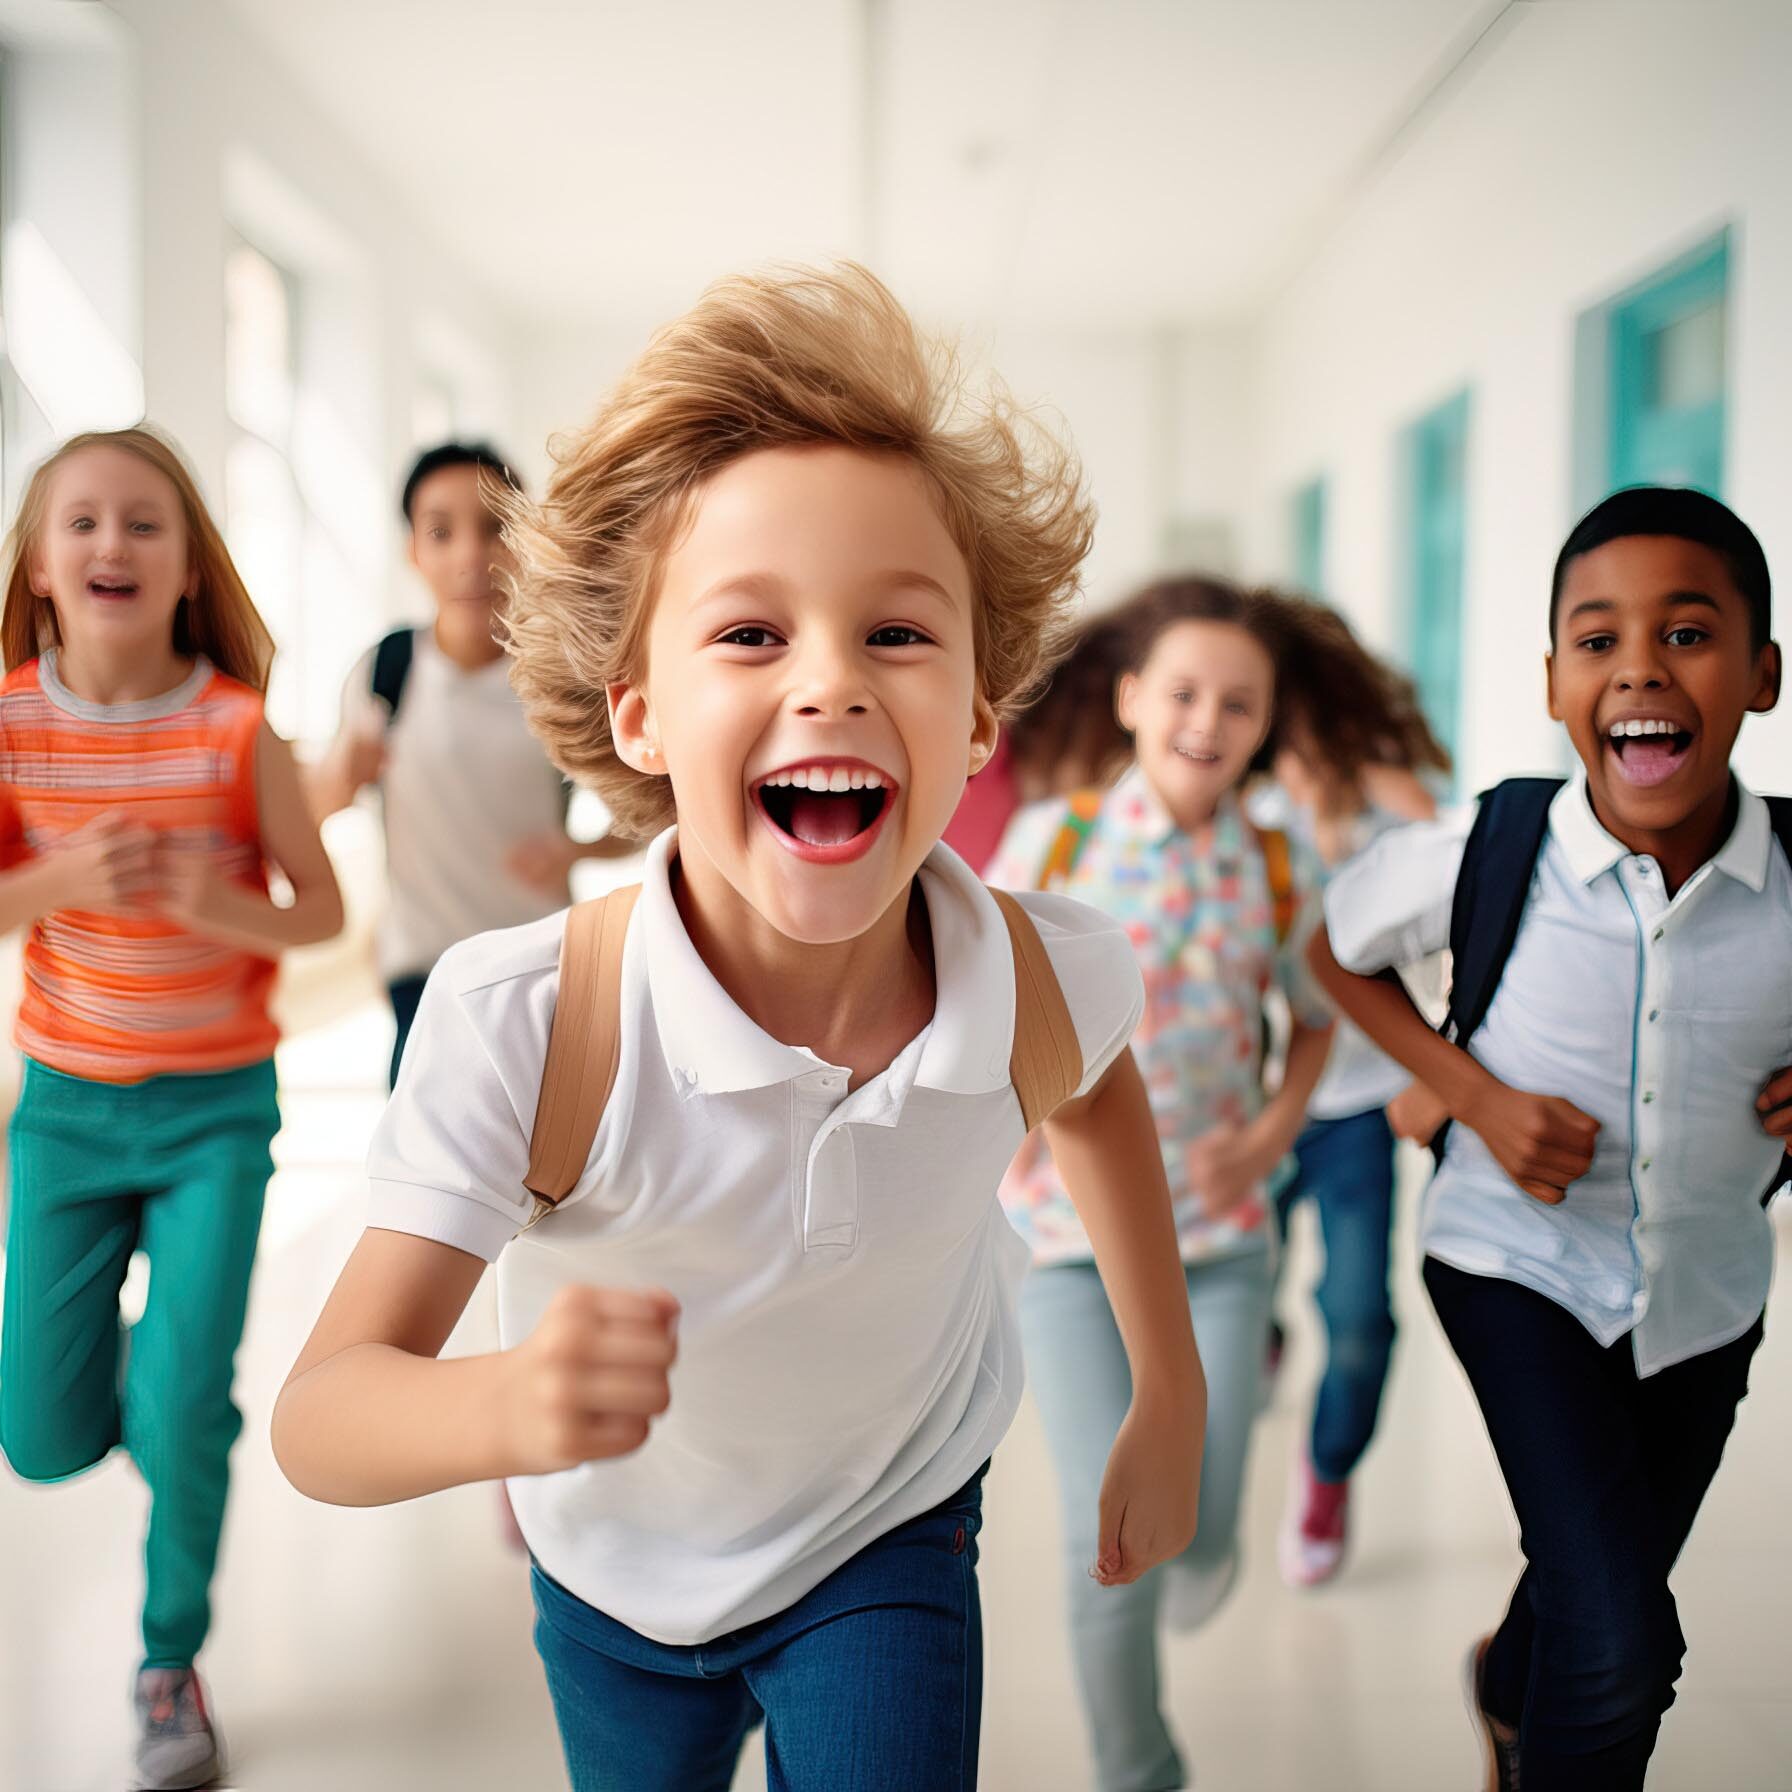 A joyful group of children running in a hallway, with one boy beaming after receiving dental fillings.